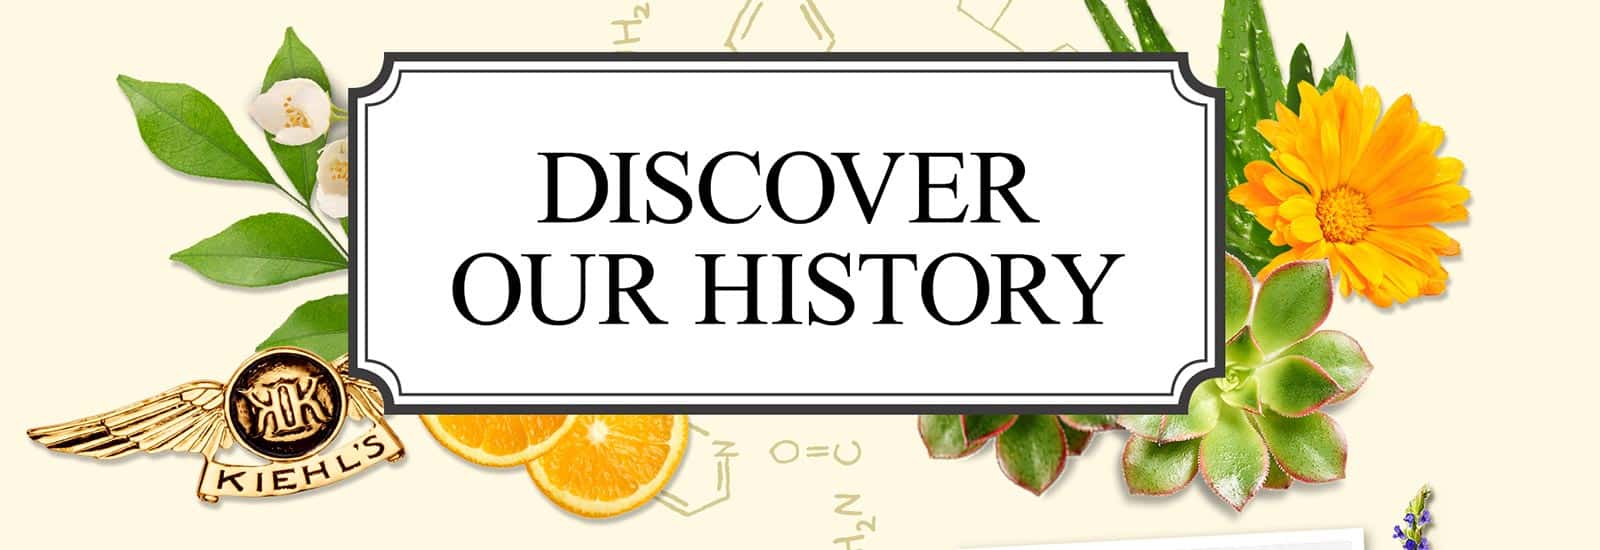 Discover Kiehl's history banner